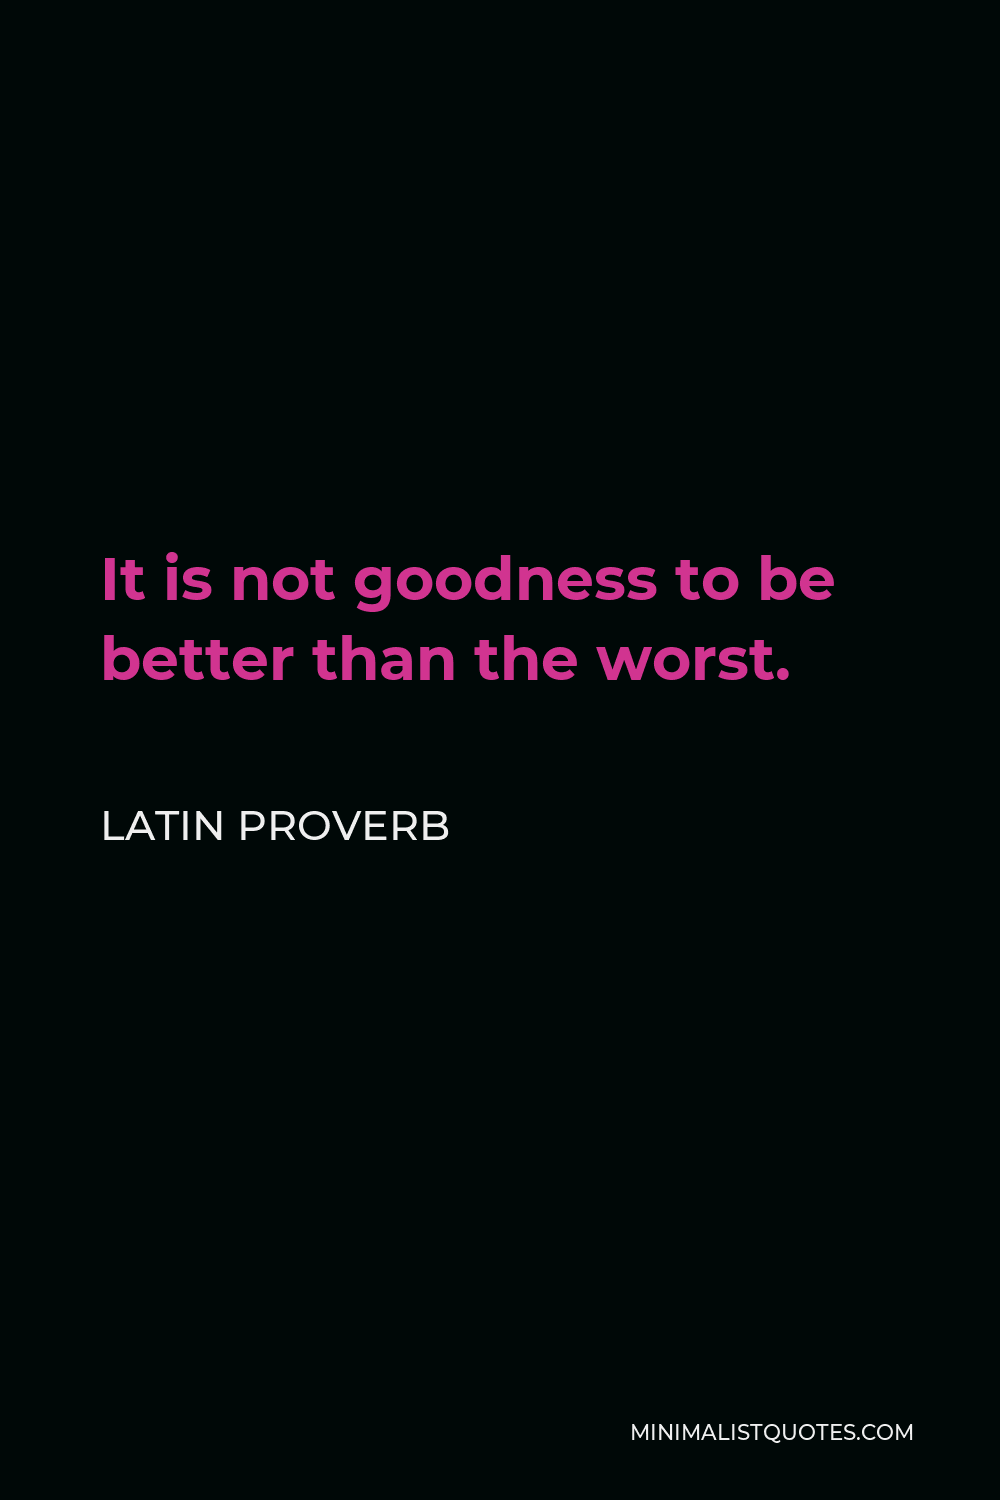 Latin Proverb Quote - It is not goodness to be better than the worst.